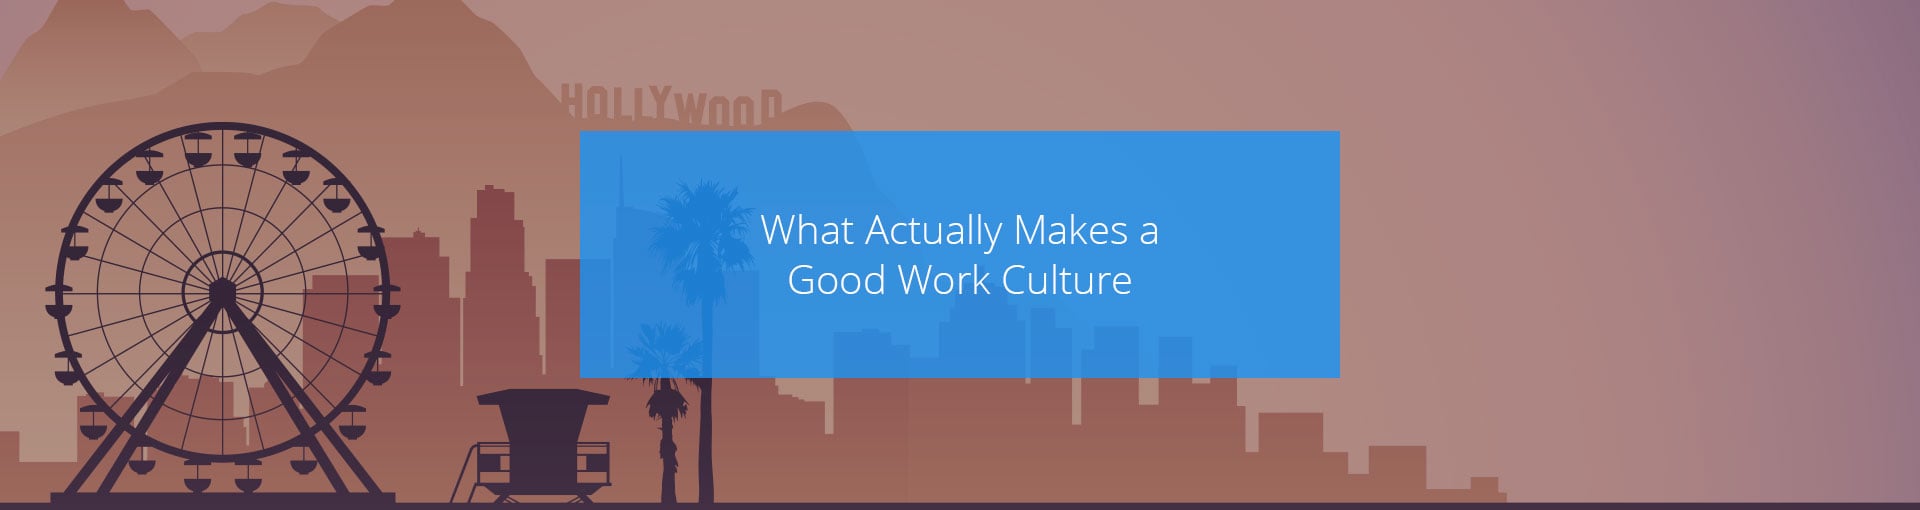 What Actually Makes a Good Work Culture Featured Image